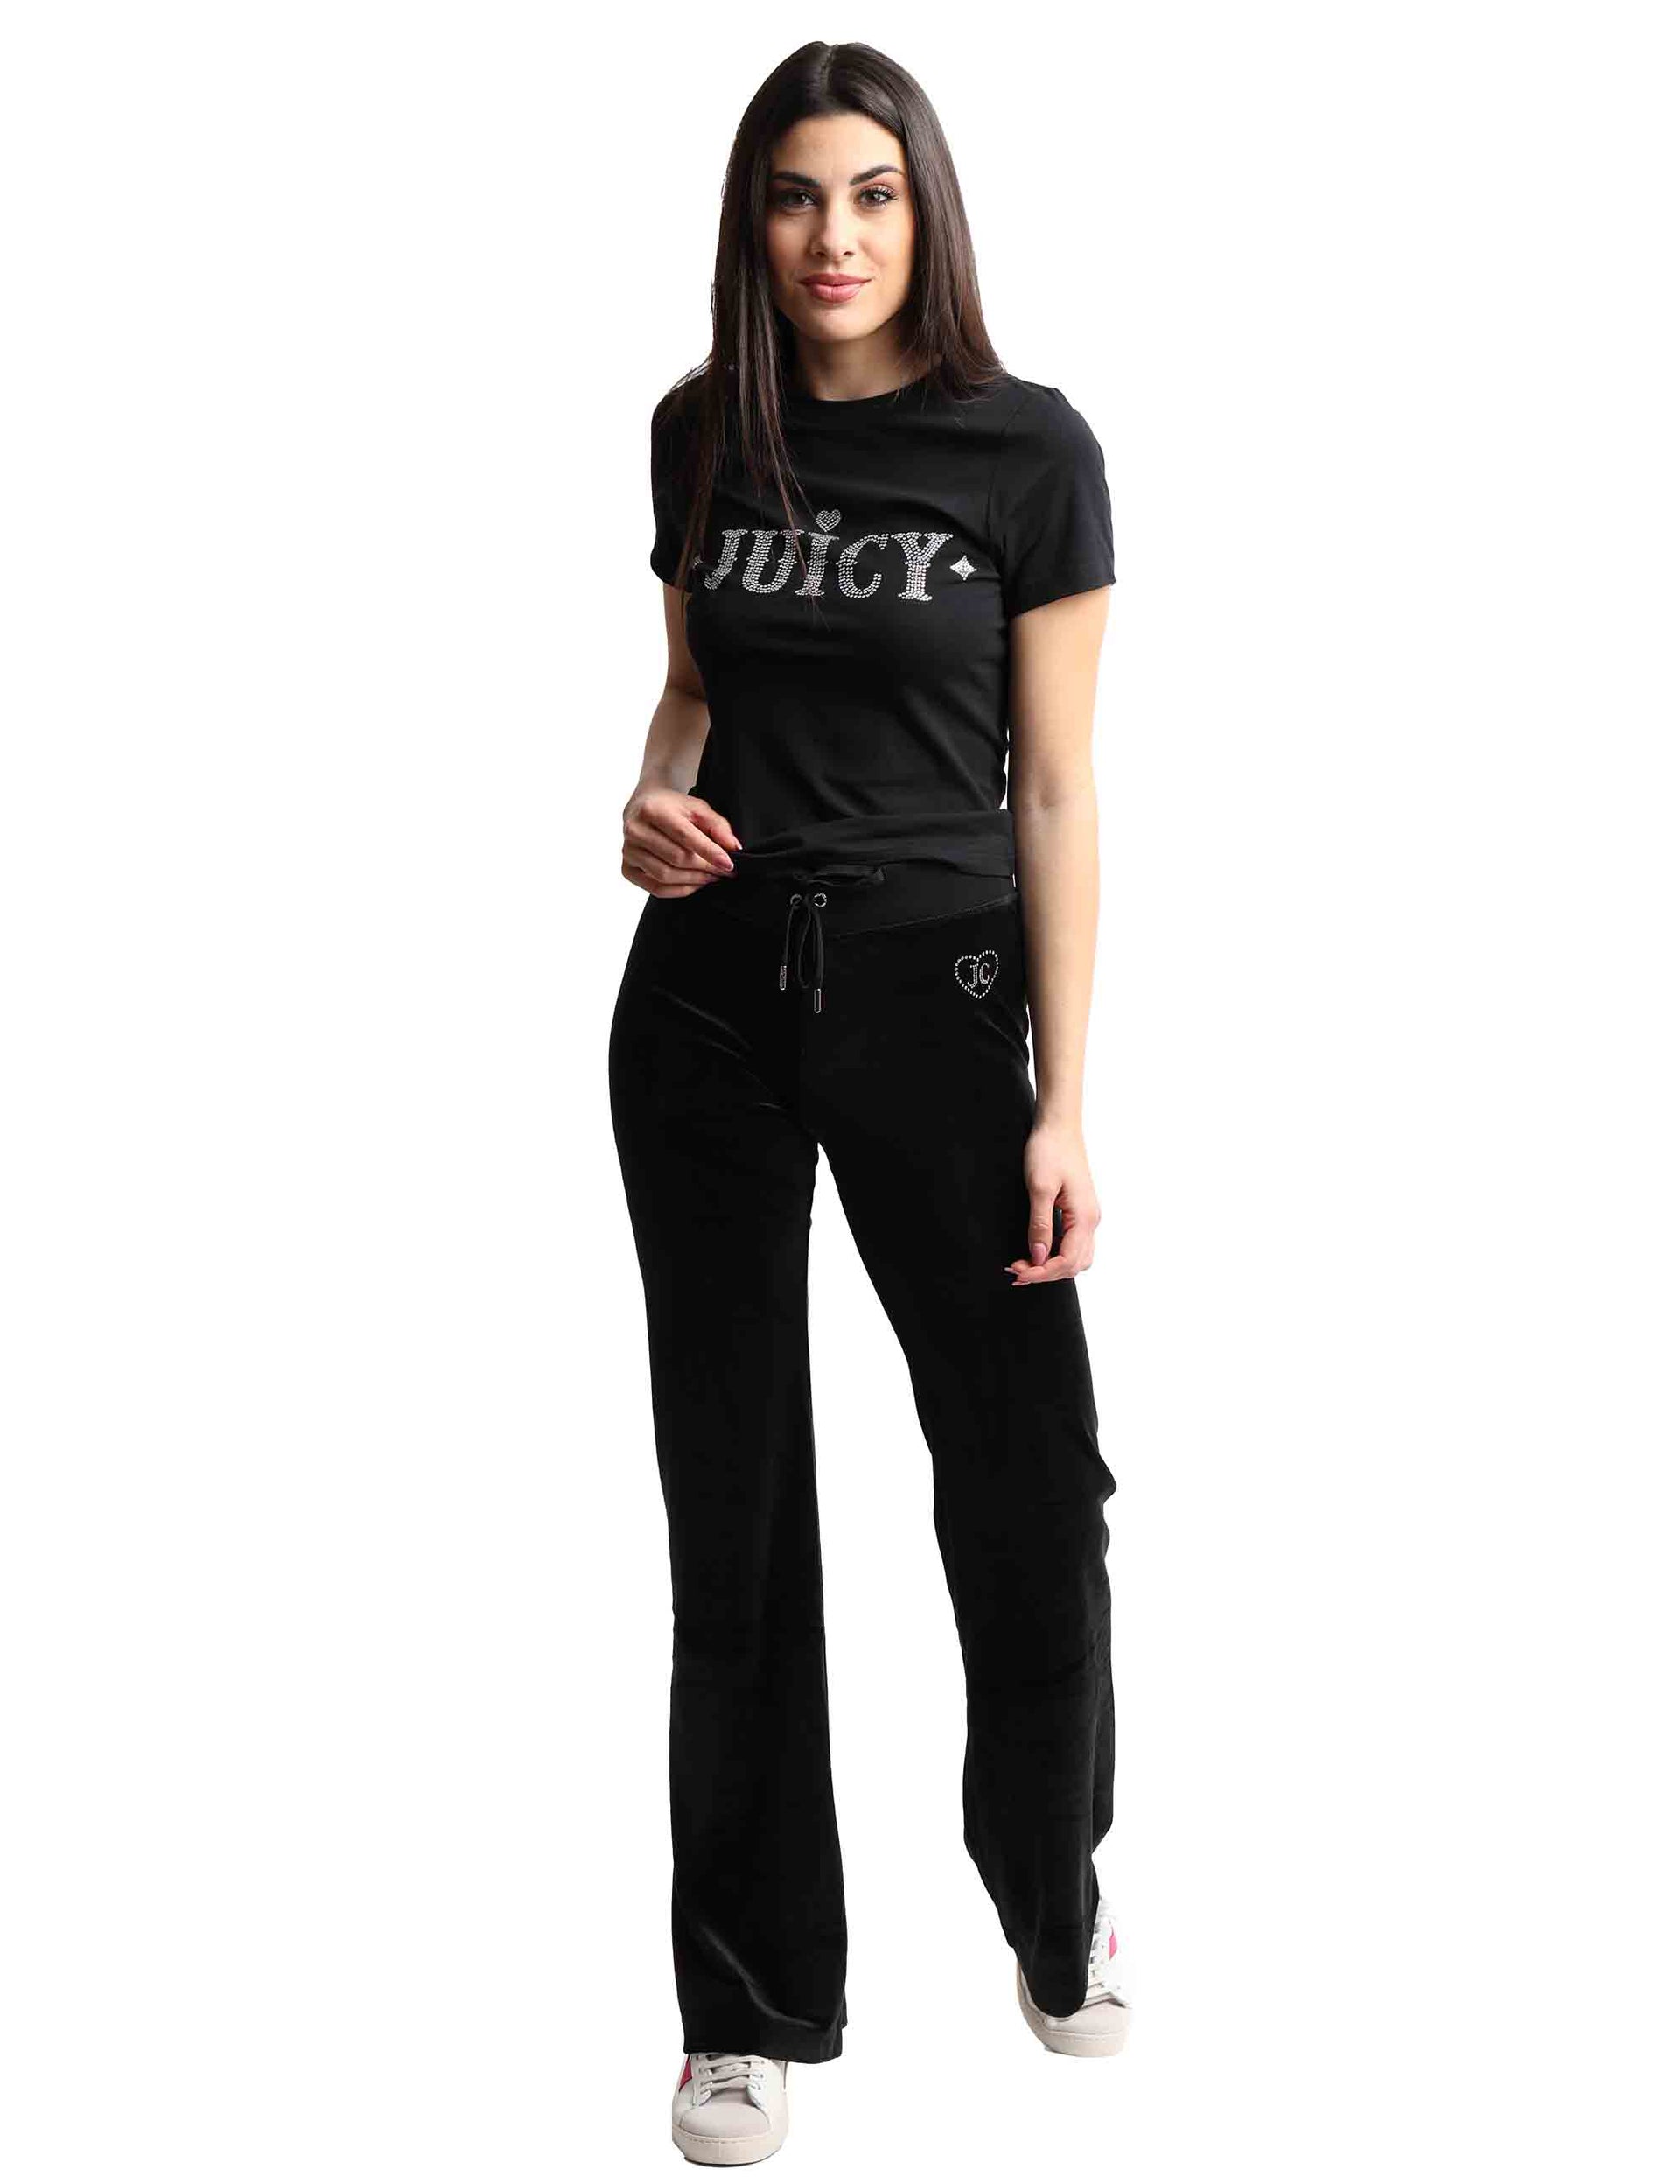 Ryder Rodeo women's t-shirts in black cotton with crew neck and rhinestones